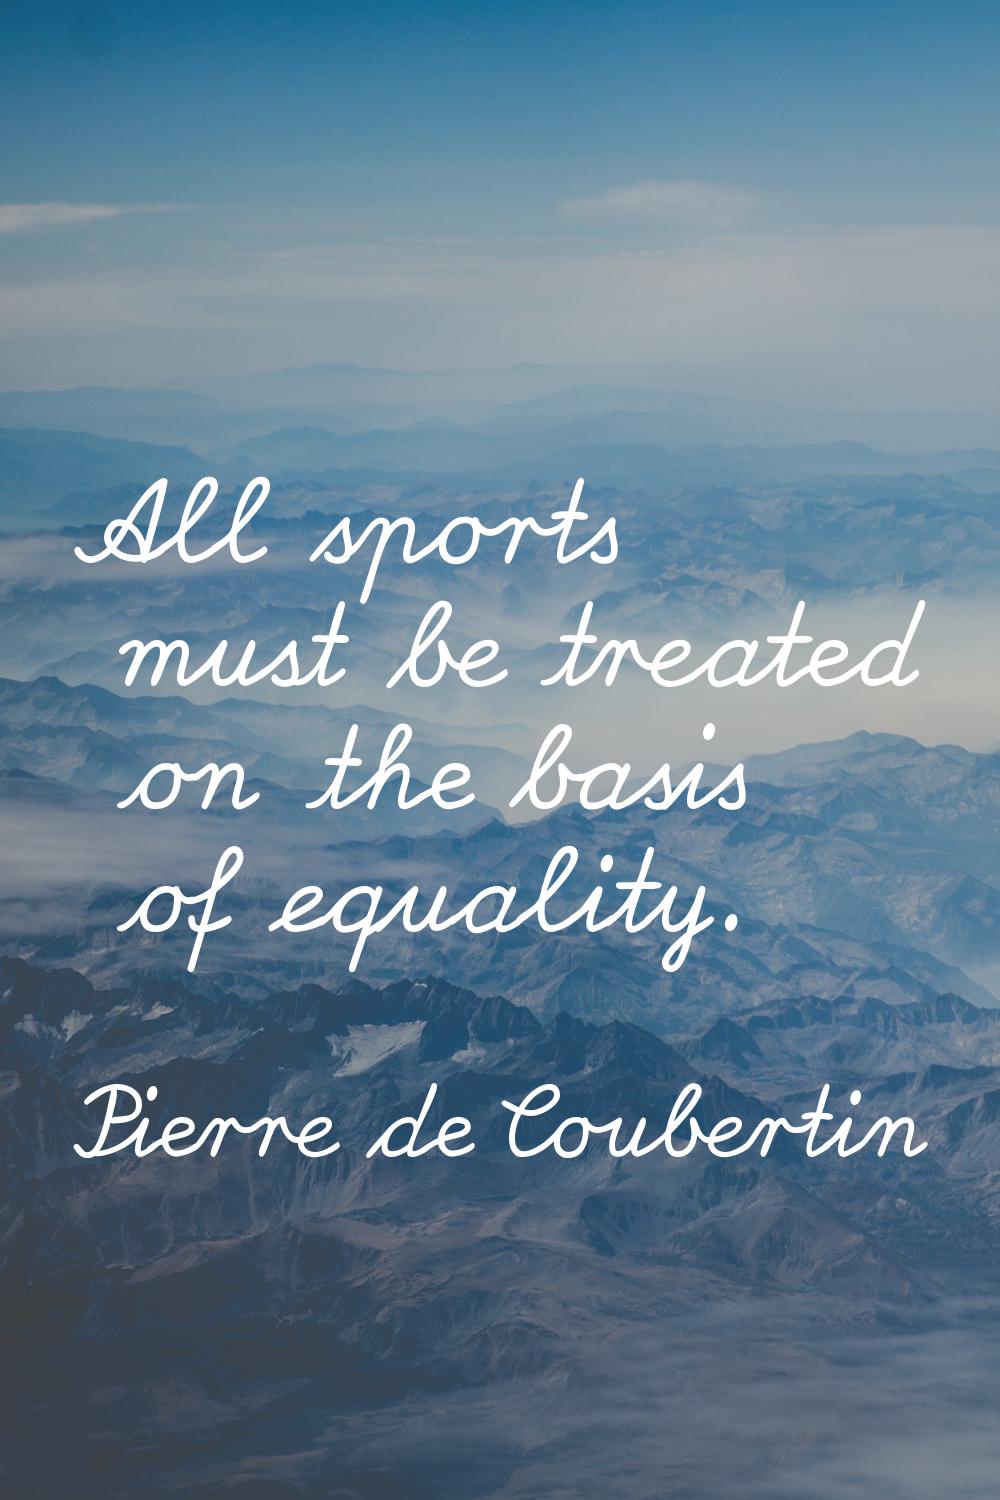 All sports must be treated on the basis of equality.